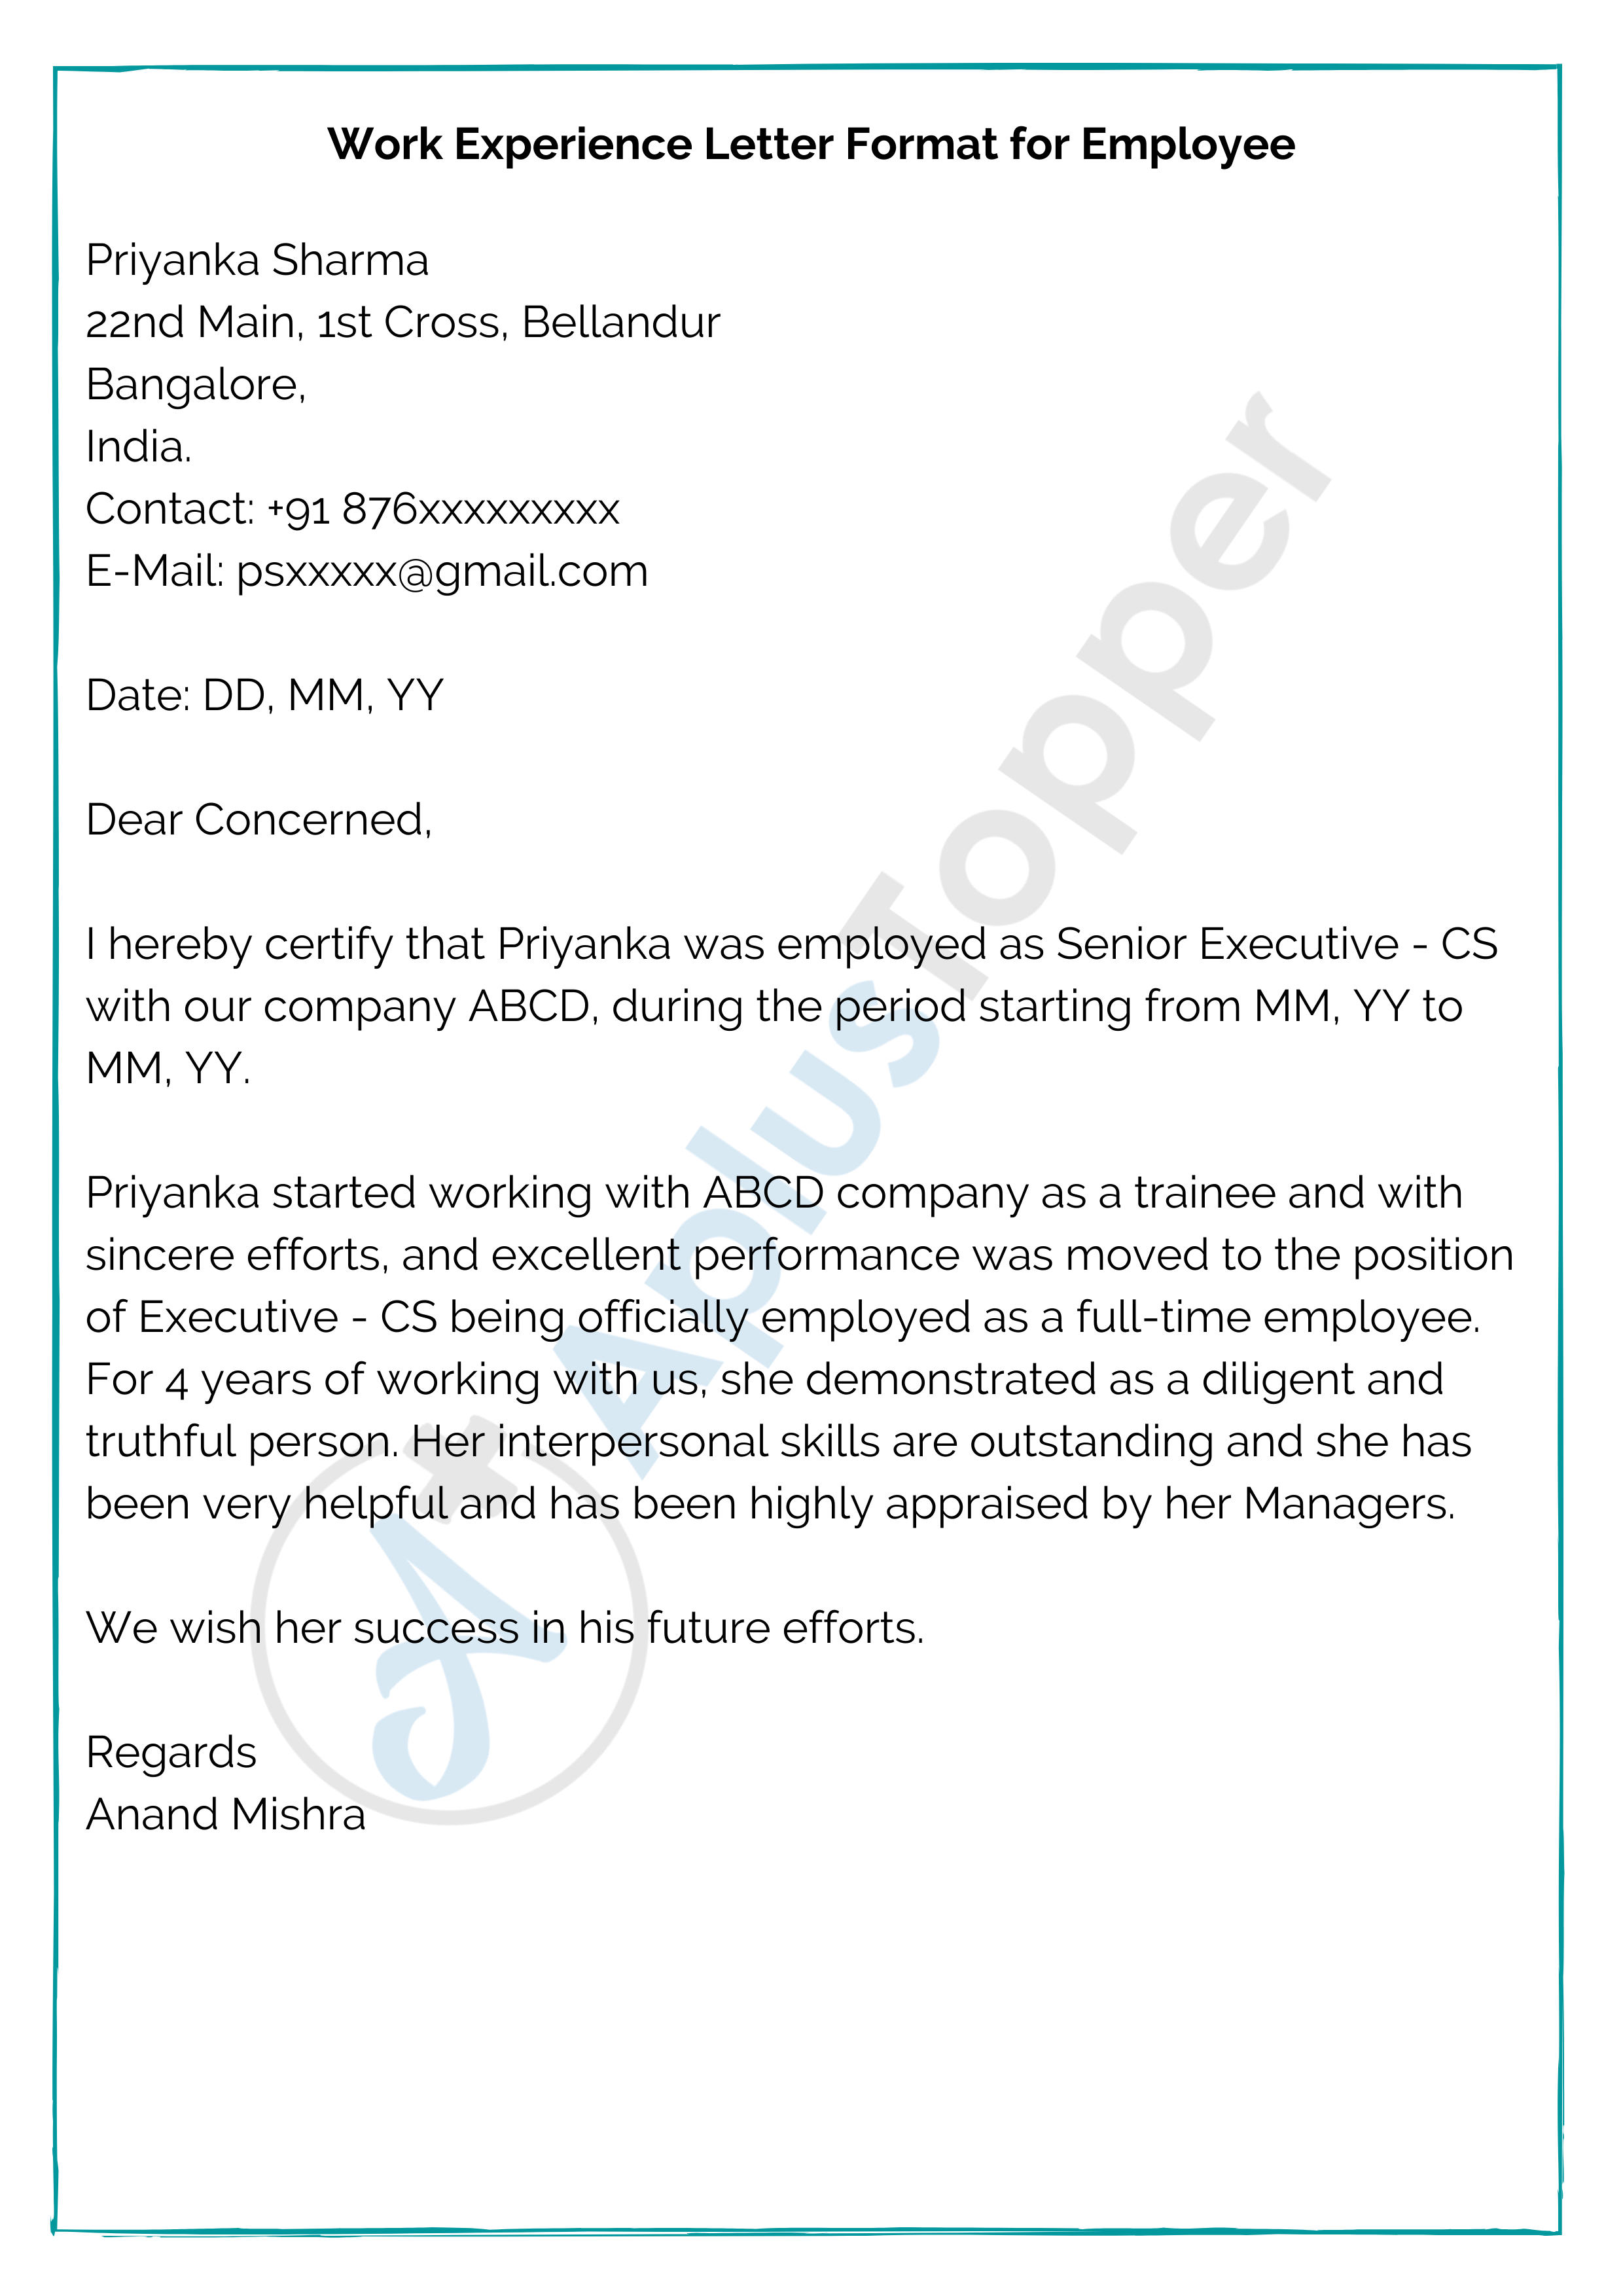 Experience Letter Format Work Experience Letter Samples How To Write Experience Letter A Plus Topper